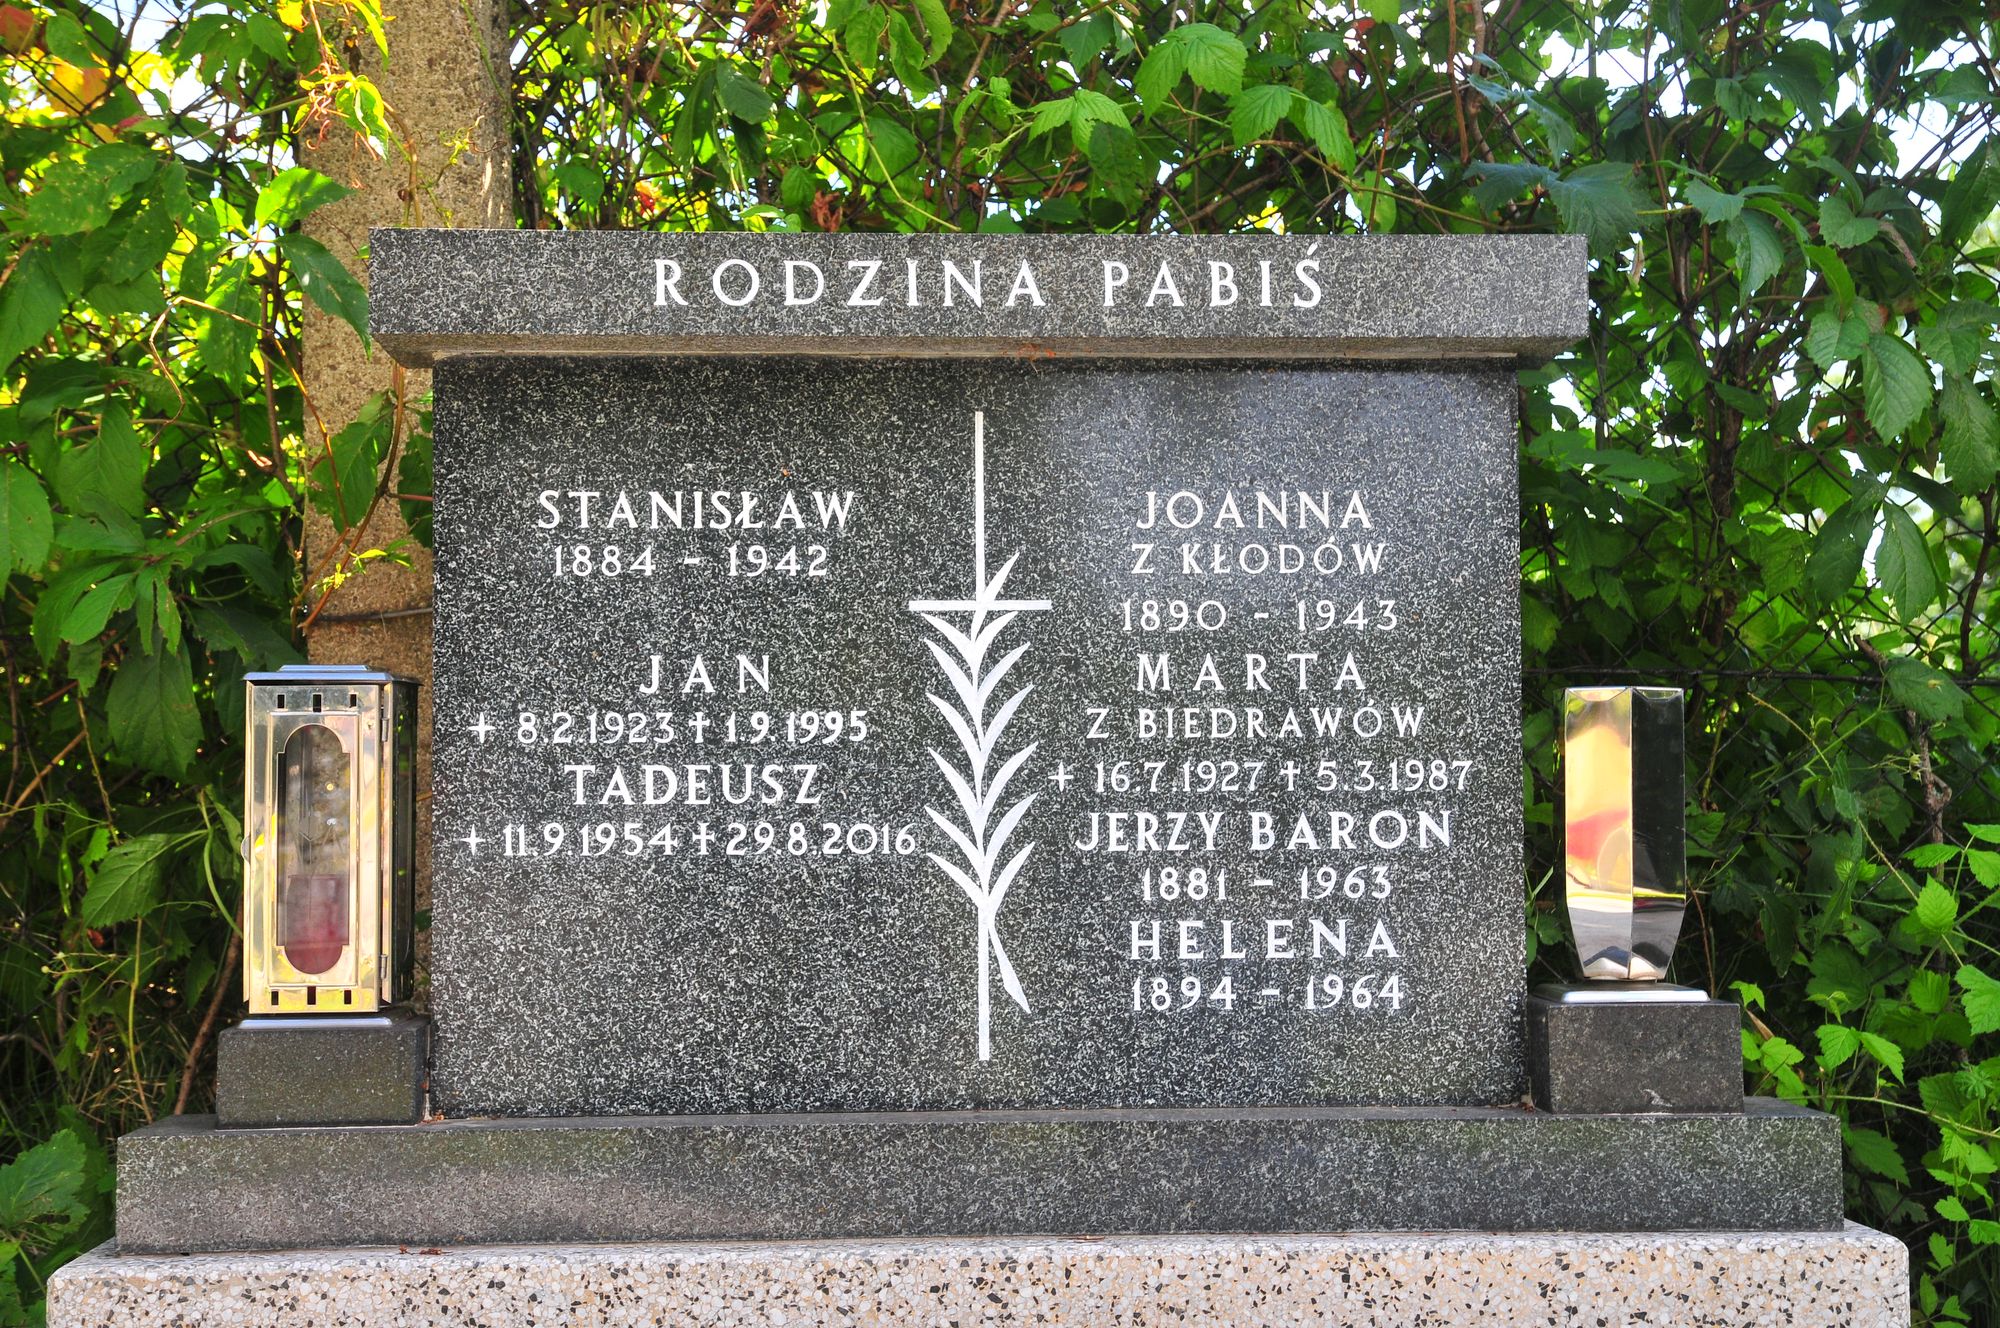 Tombstone of the Pabiś family